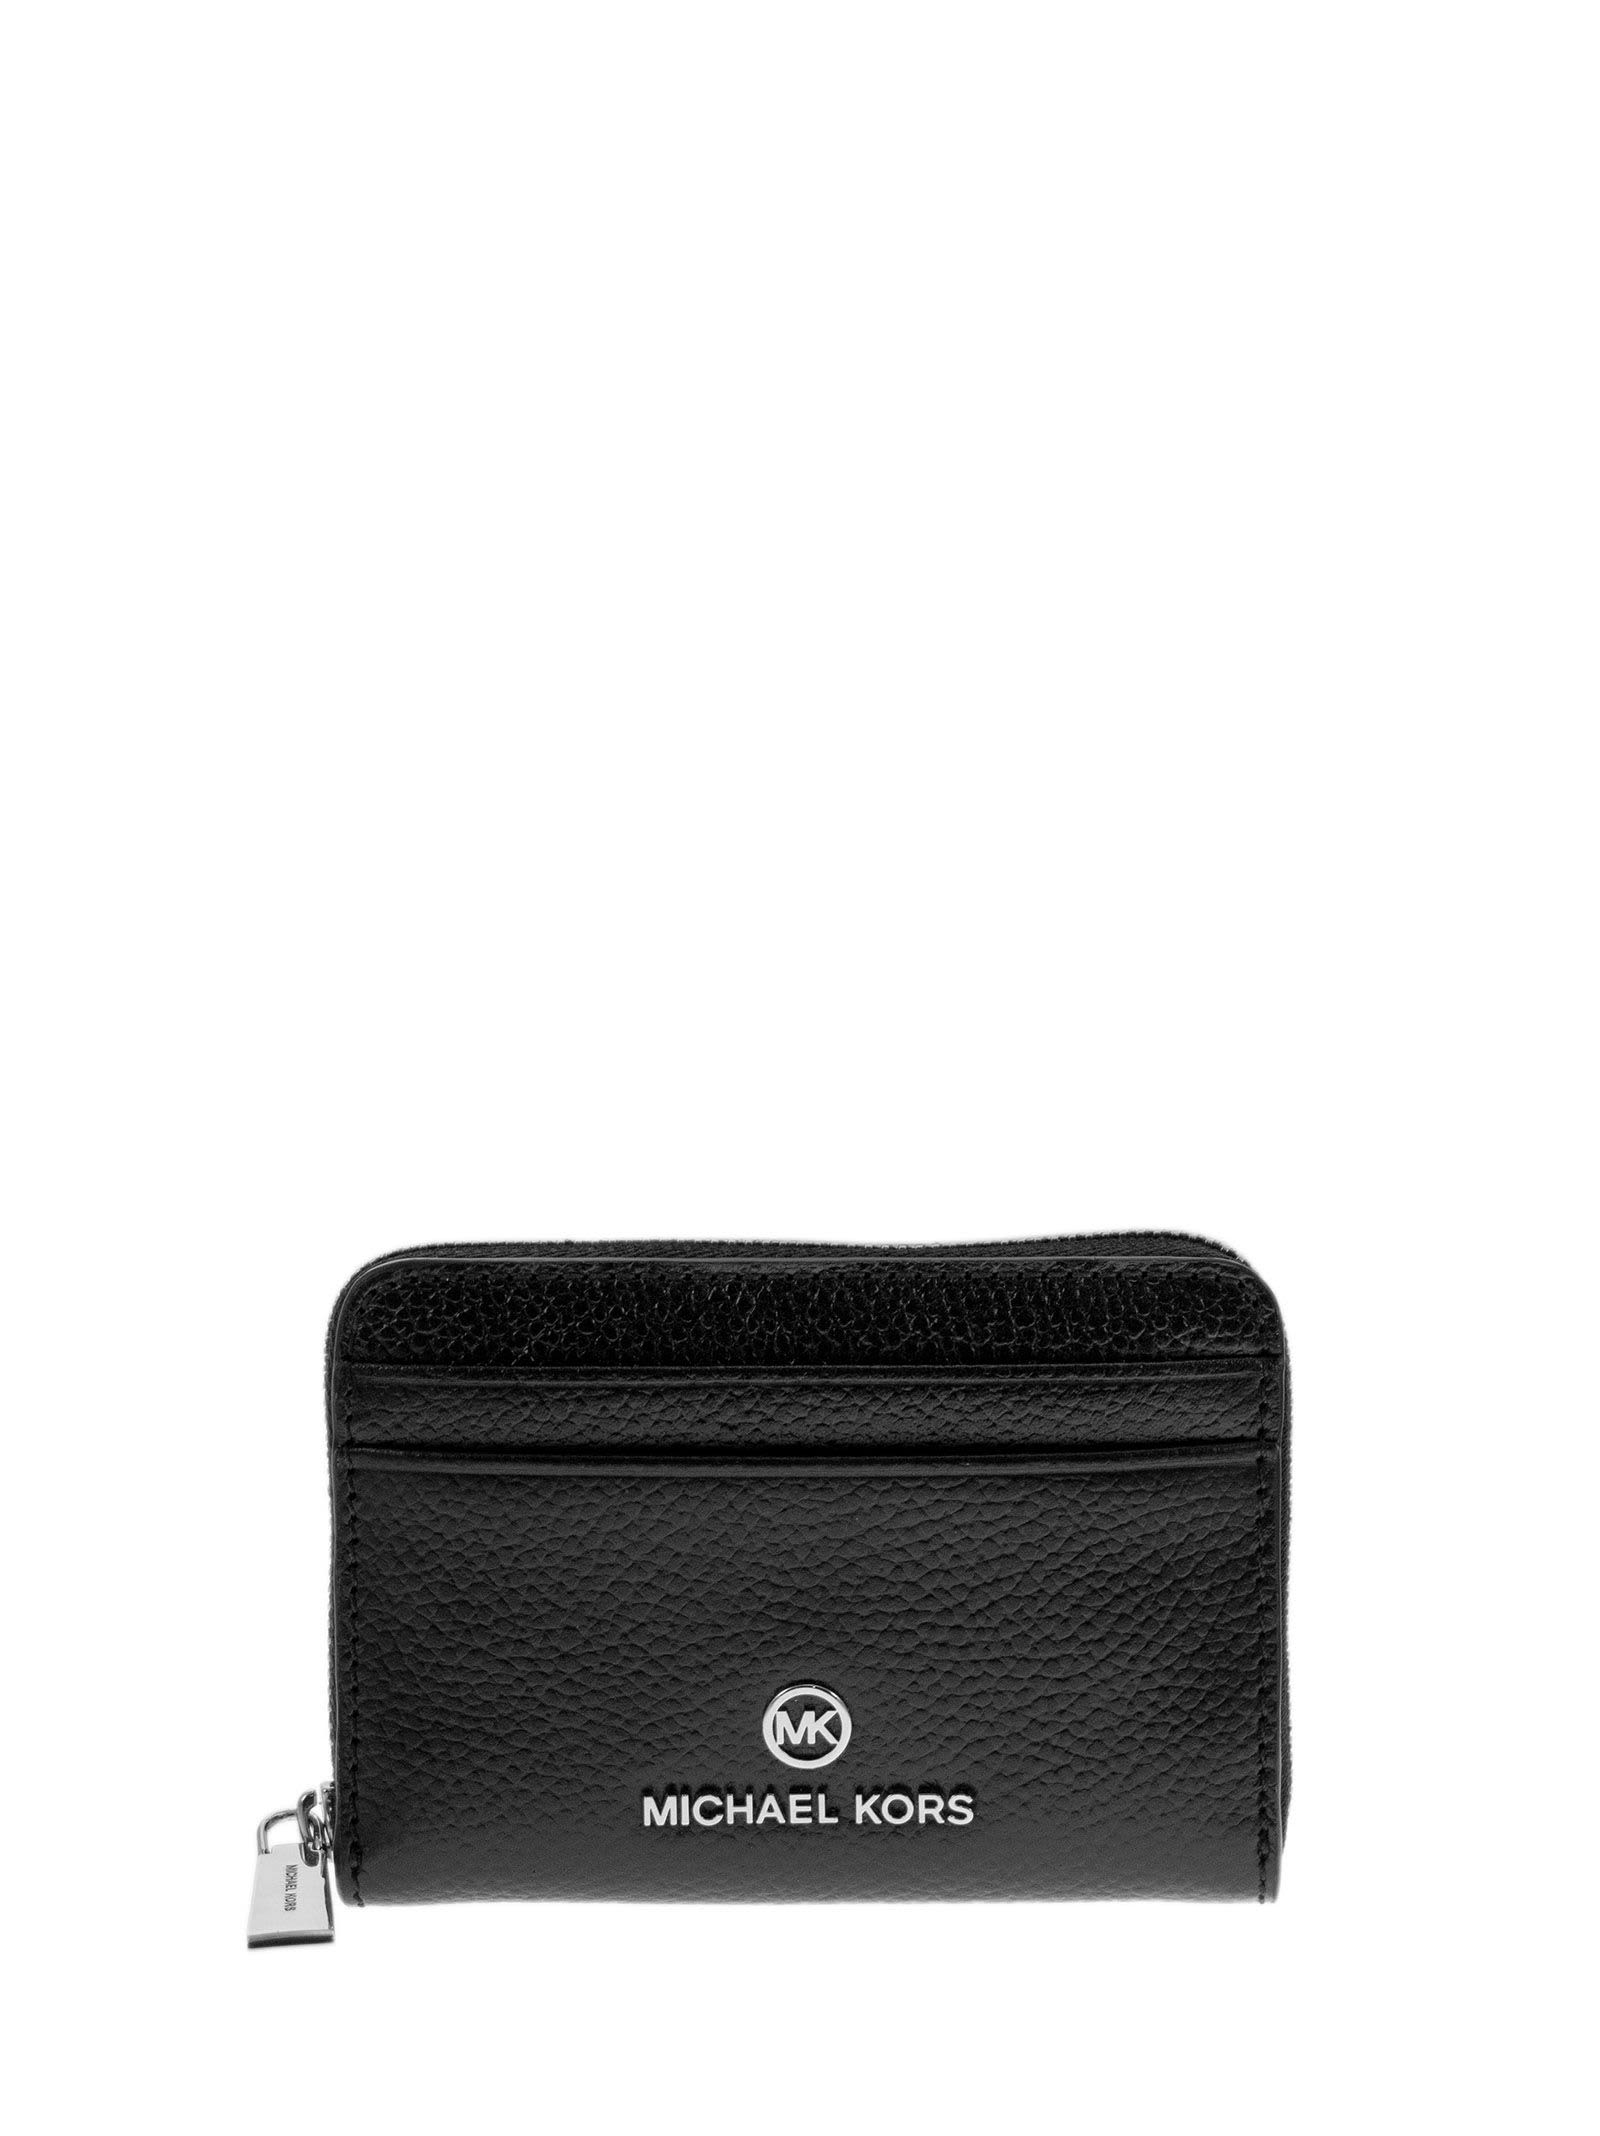 Michael Kors Jet Set - Wallet With Logo Small